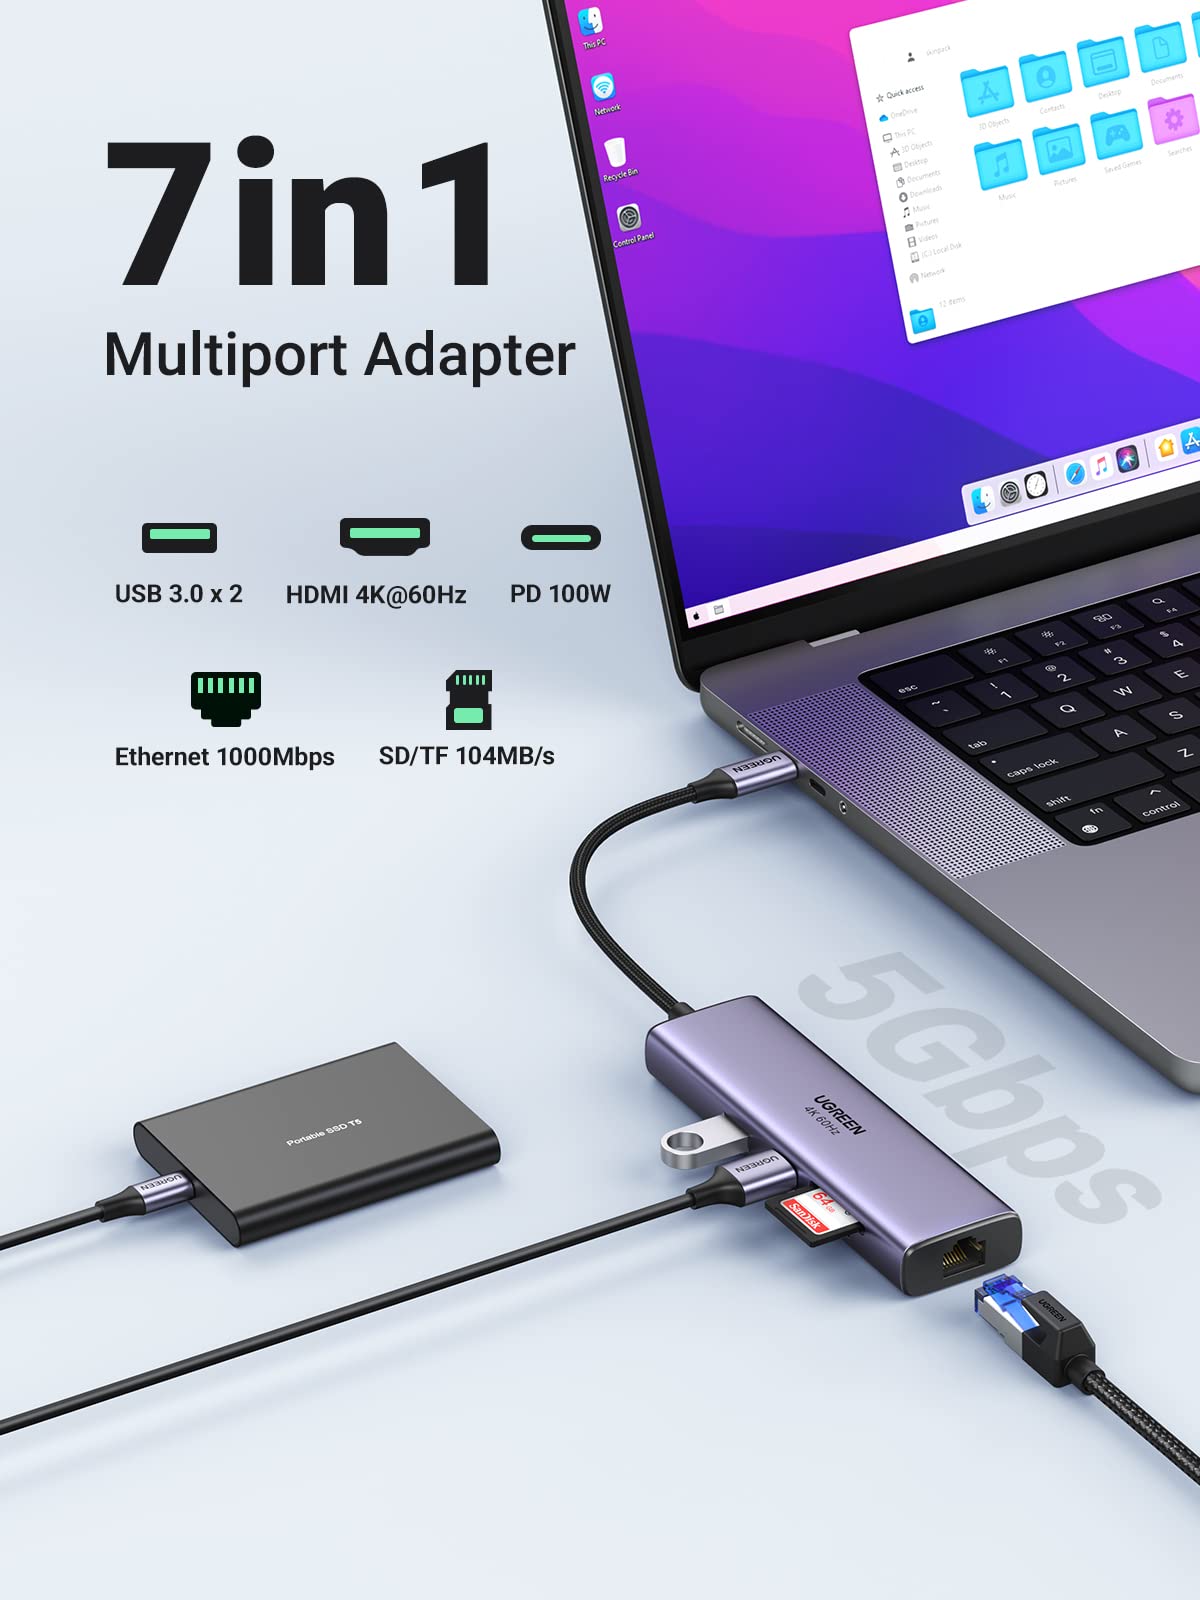  USB C Dual HDMI Adapter, USB C Laptop Docking Station 9 in 1  Triple Display Multiport Dongle, Type C Hub with 2 HDMI, 100W PD, Ethernet,  3 USB and SD/TF Card